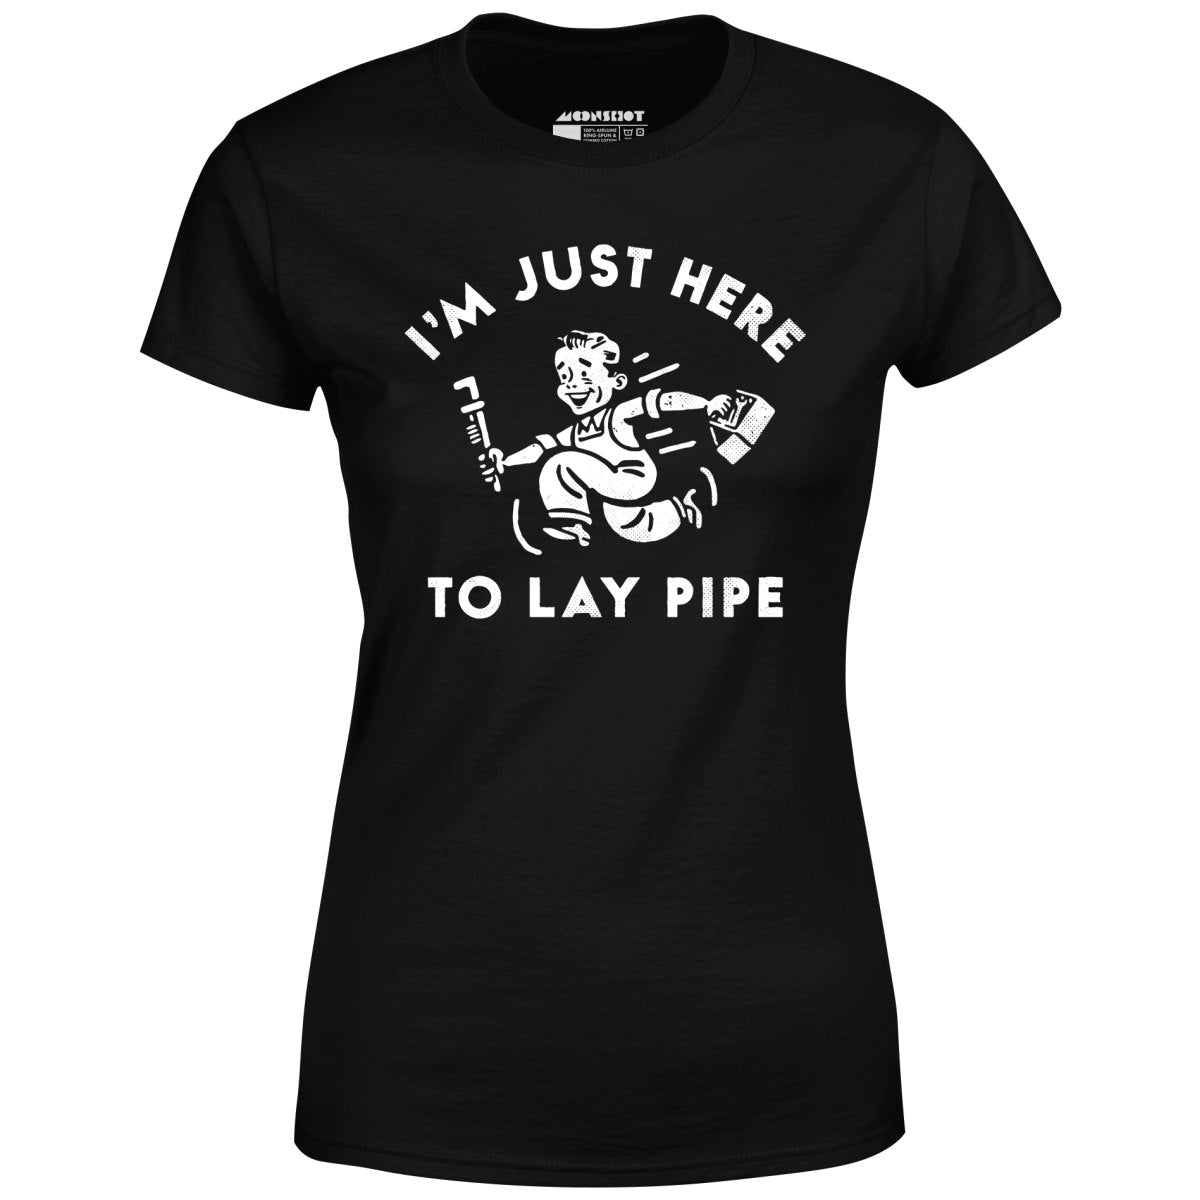 I'm Just Here to Lay Pipe - Women's T-Shirt